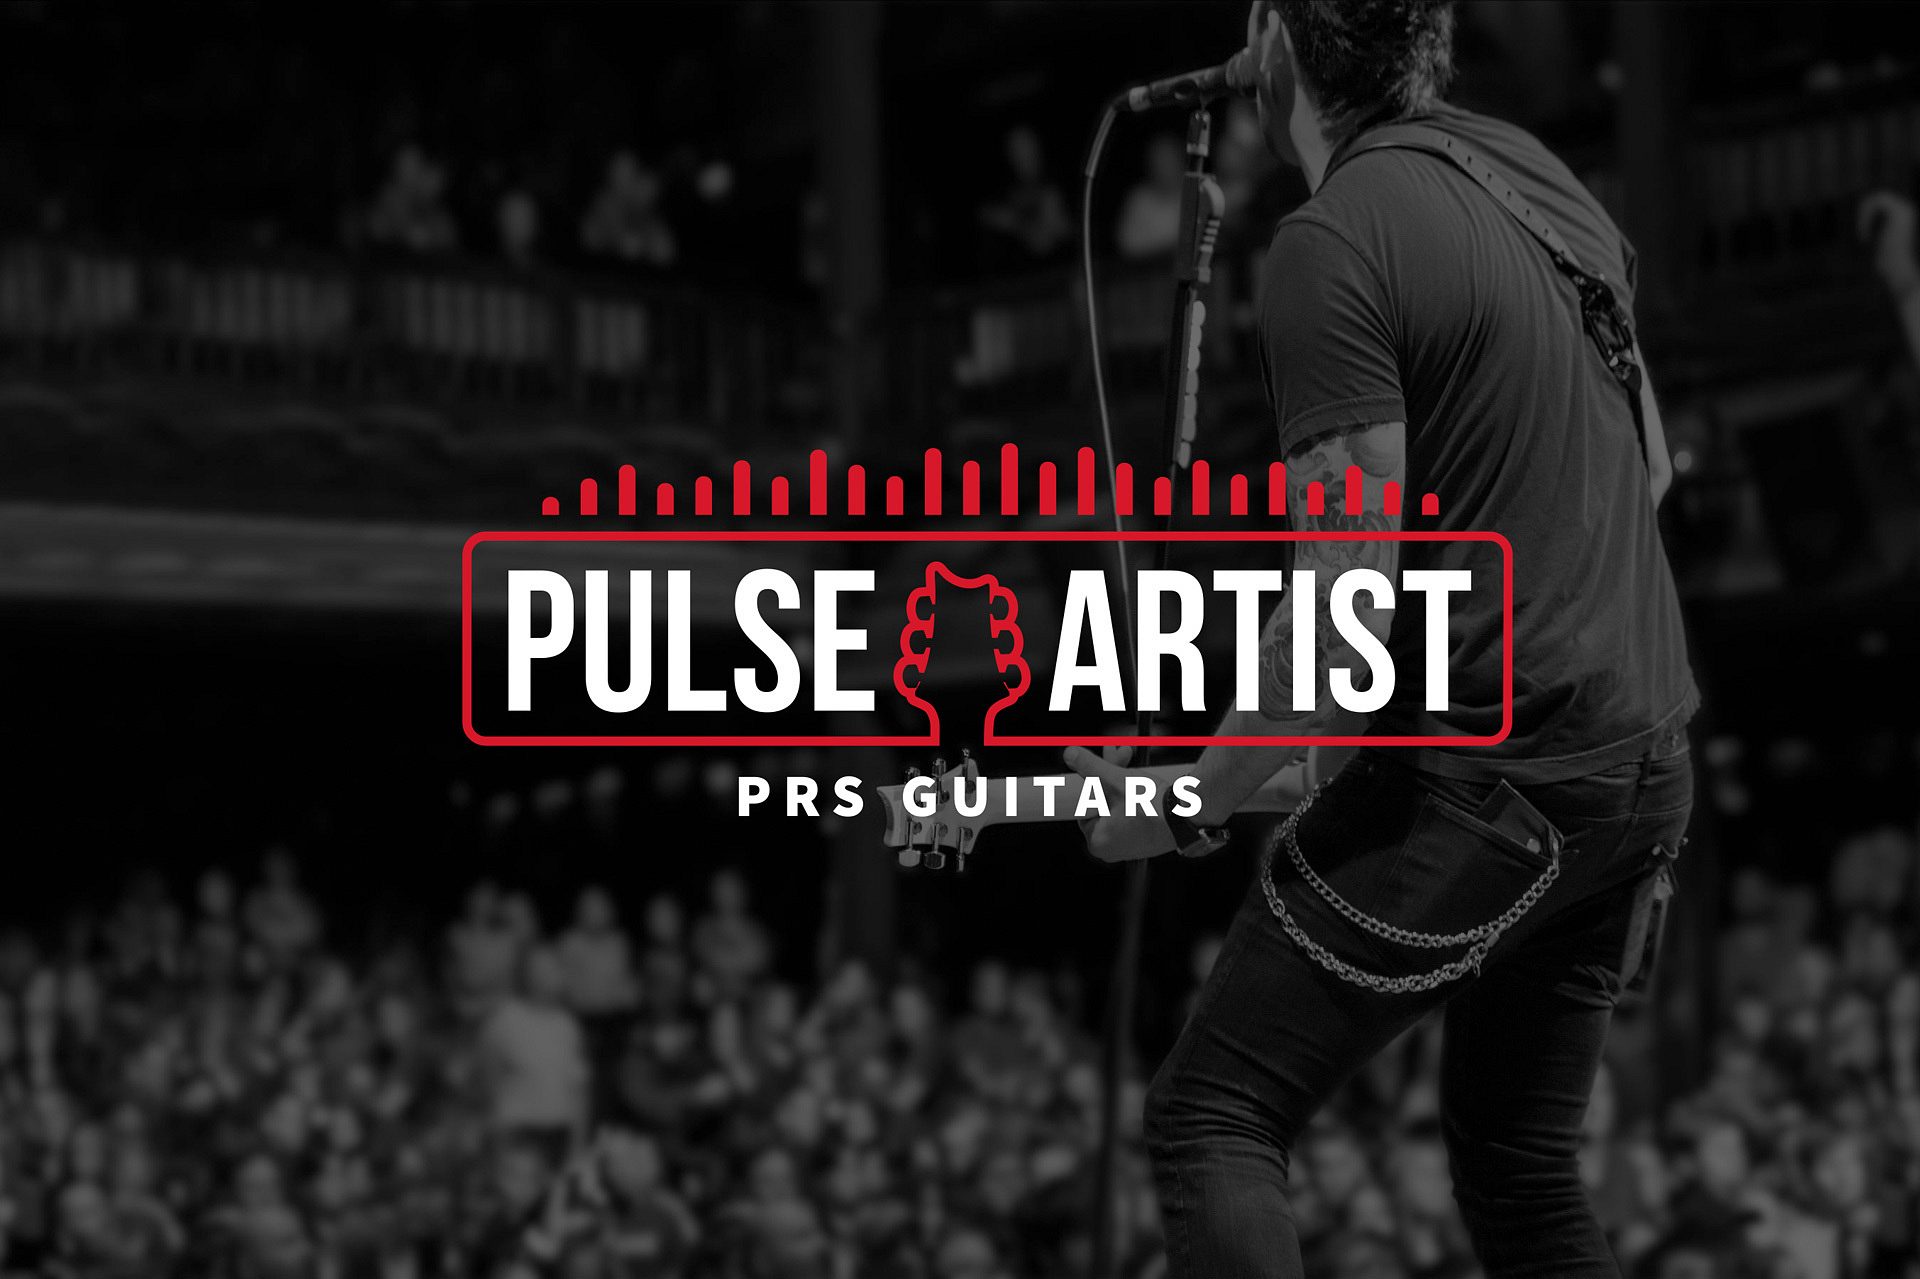 PRS Pulse Artists Are Making Waves